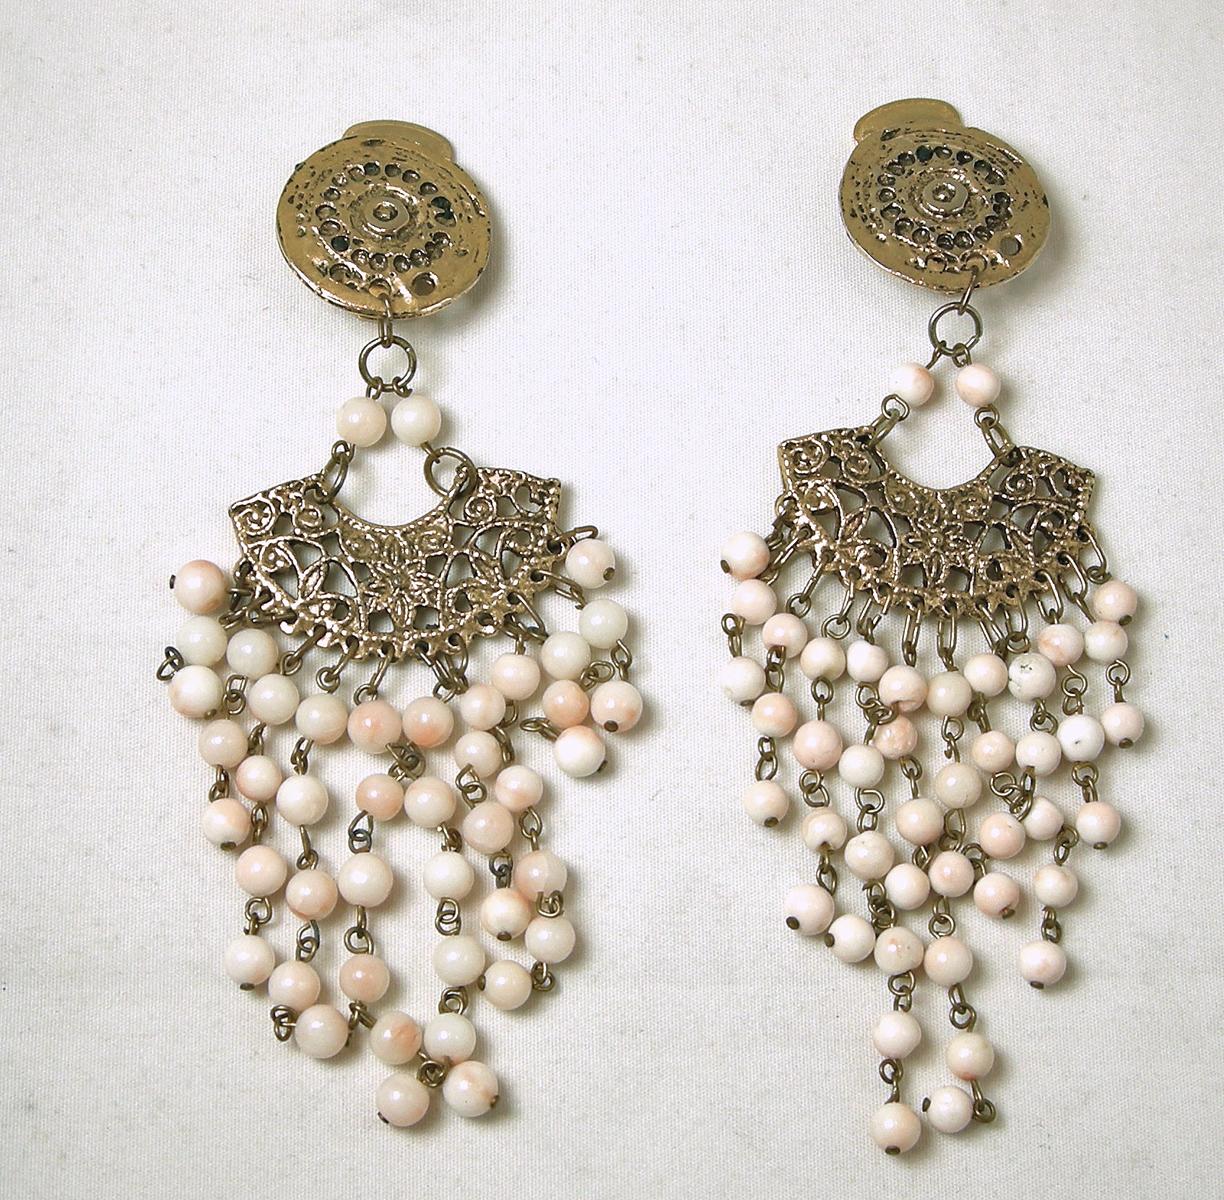 These long vintage earrings have a decorative antique gold tone top with dangling faux angel coral beads.  These clip earrings measure 4-1/2” x approx 1-1/2” and are in excellent condition.